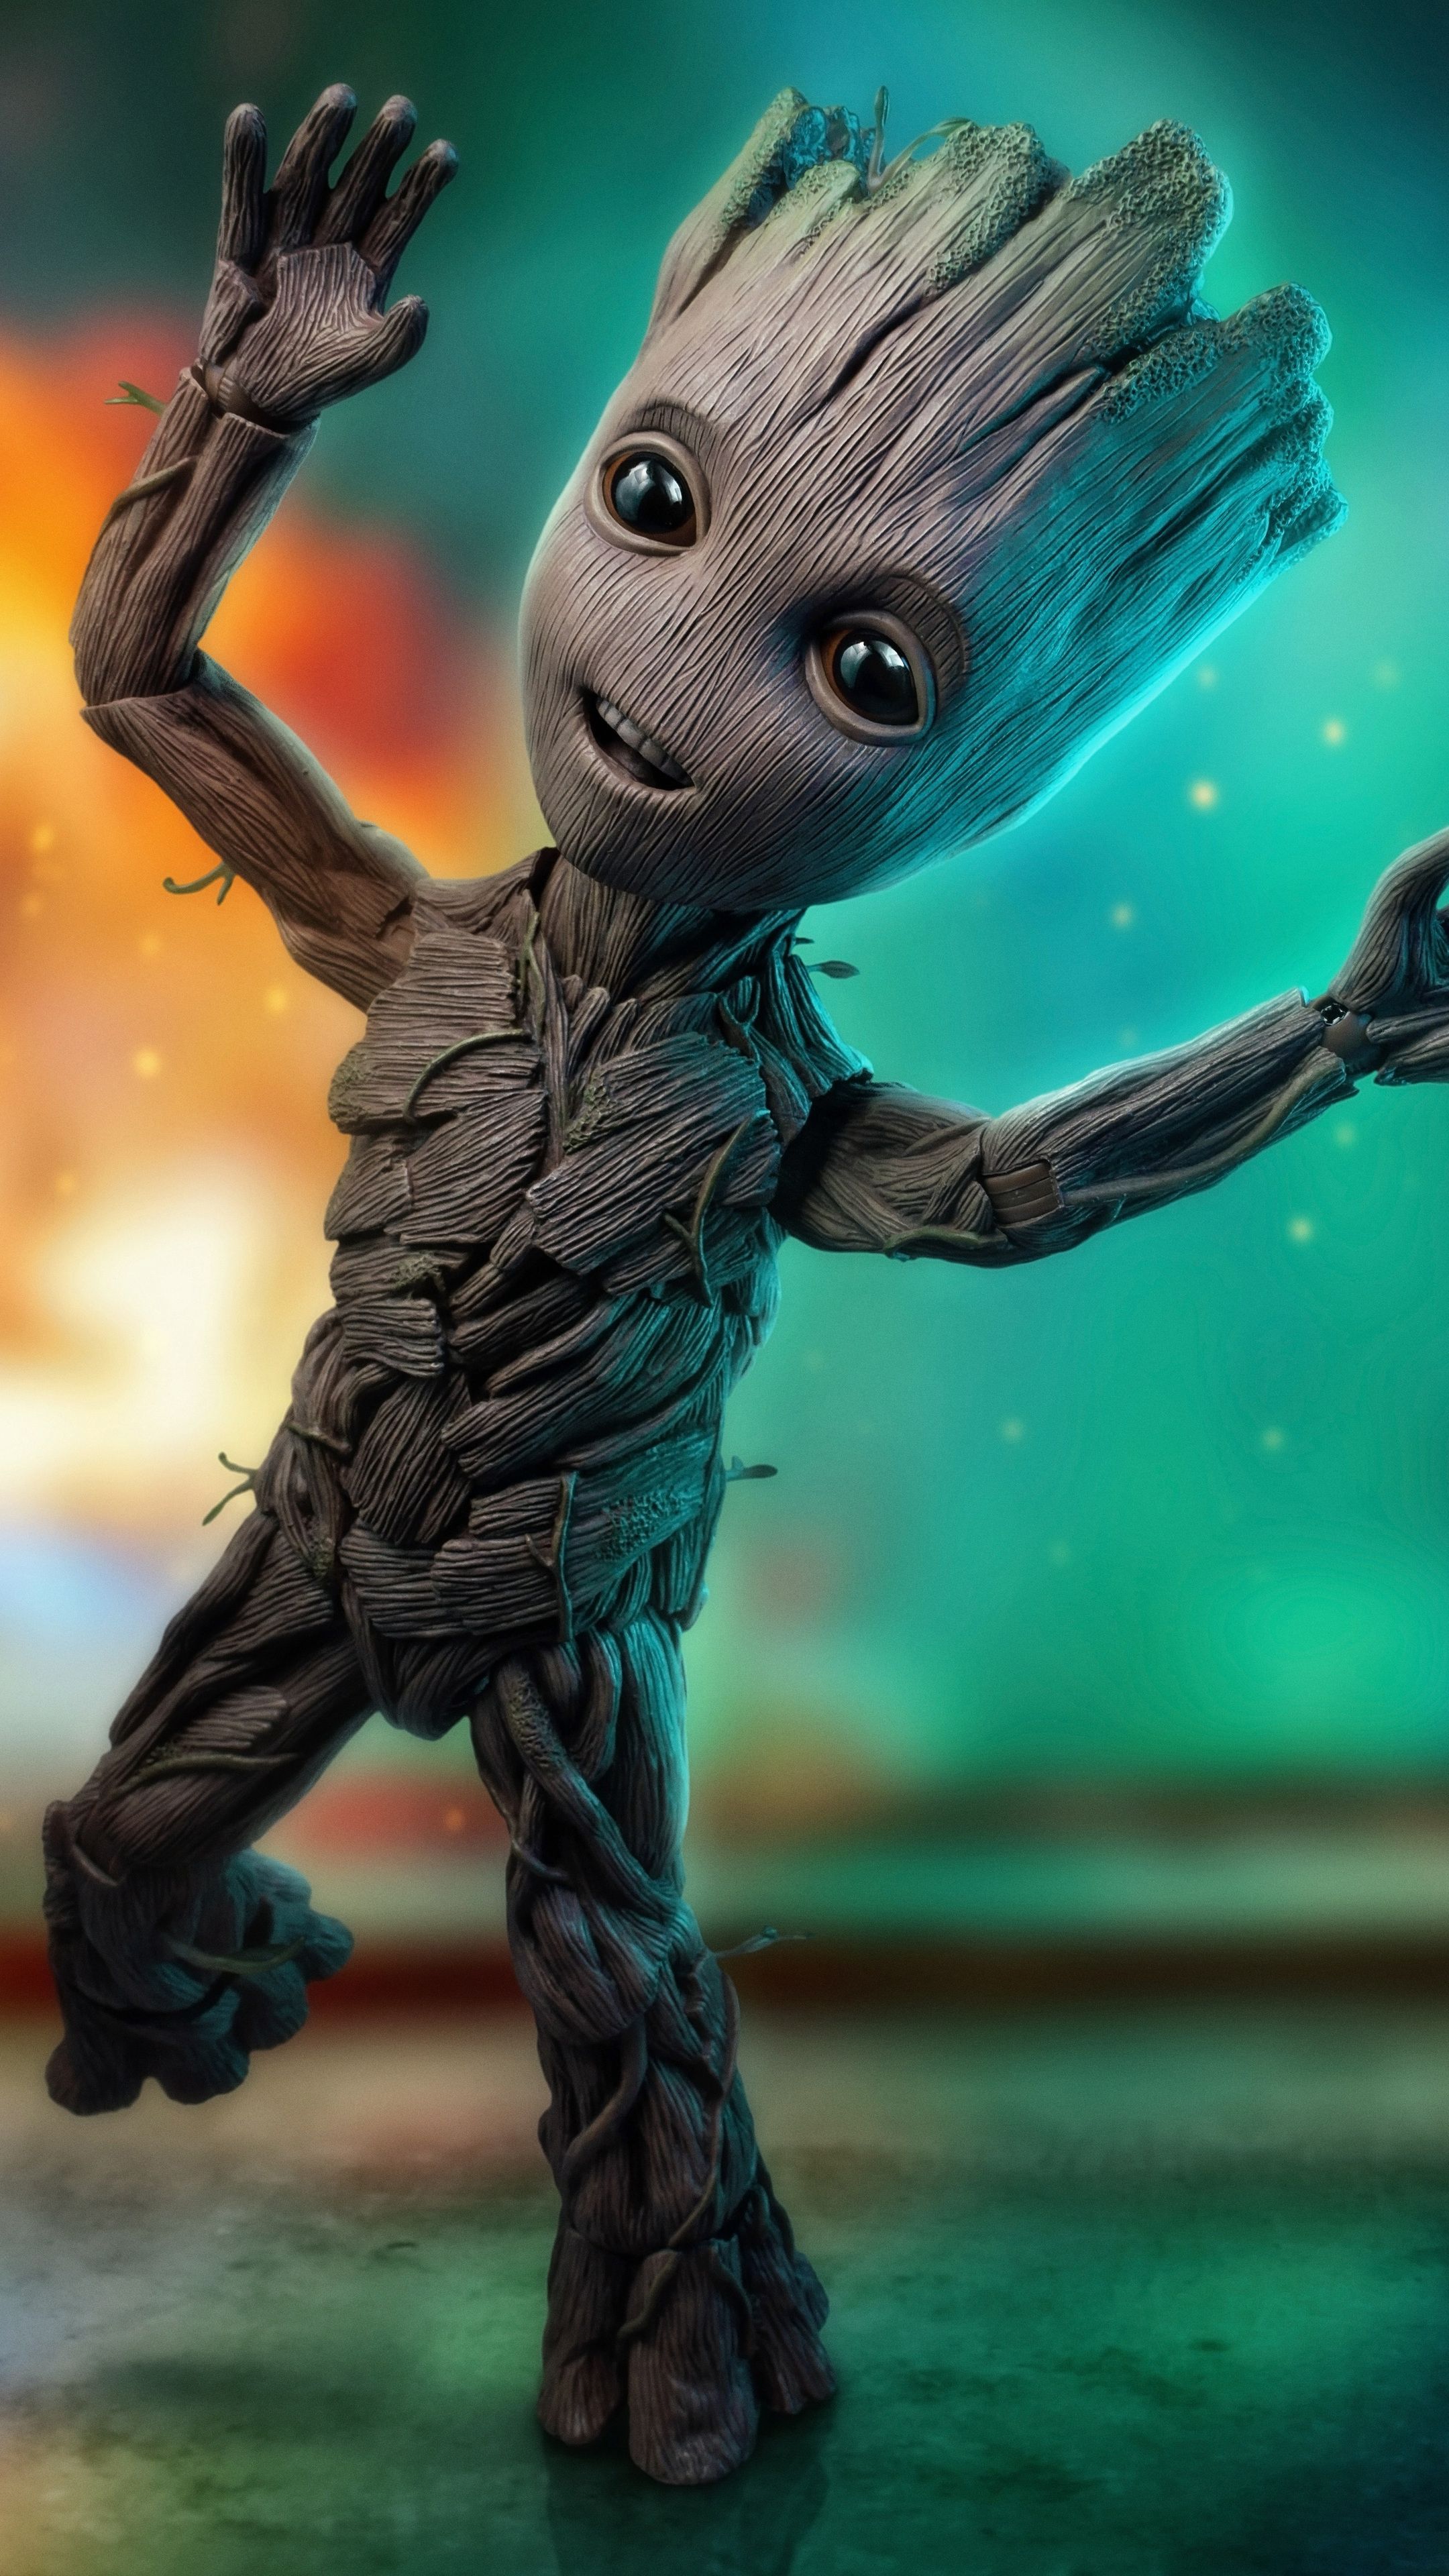 Baby Groot 4k 2018 Sony Xperia X, XZ, Z5 Premium HD 4k Wallpaper, Image, Background, Photo and Picture